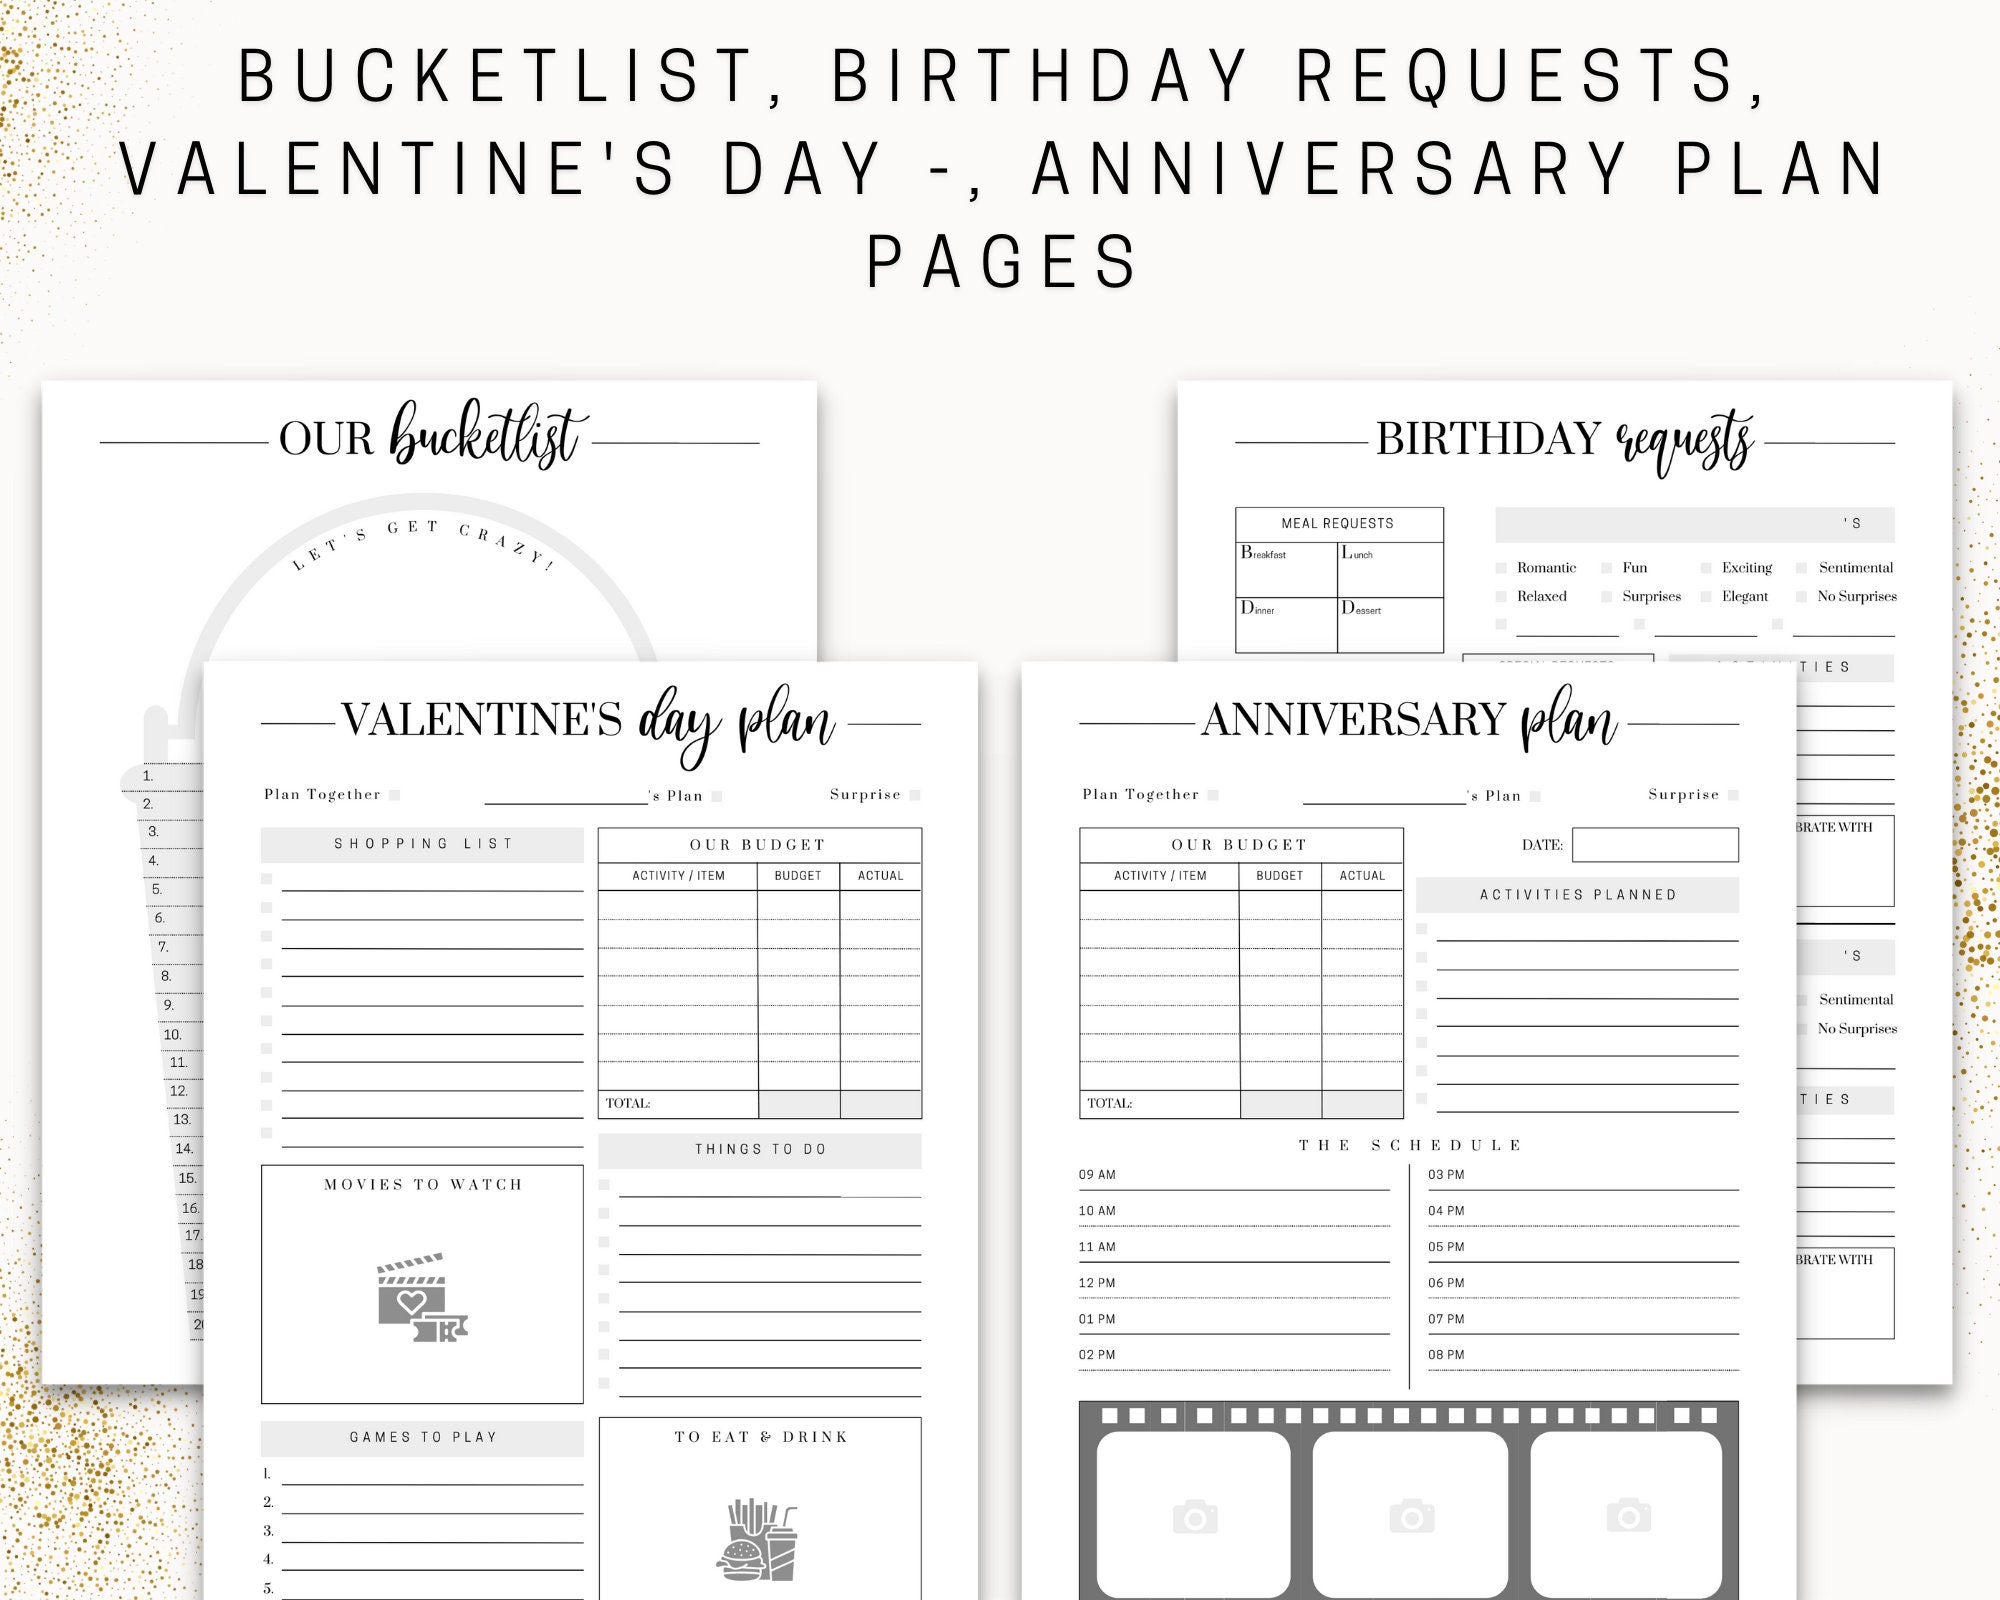 Guided Journal Printable•Couple's Journal Prompts• Relationship Journaling•  Relationship PrintablesGoodnote